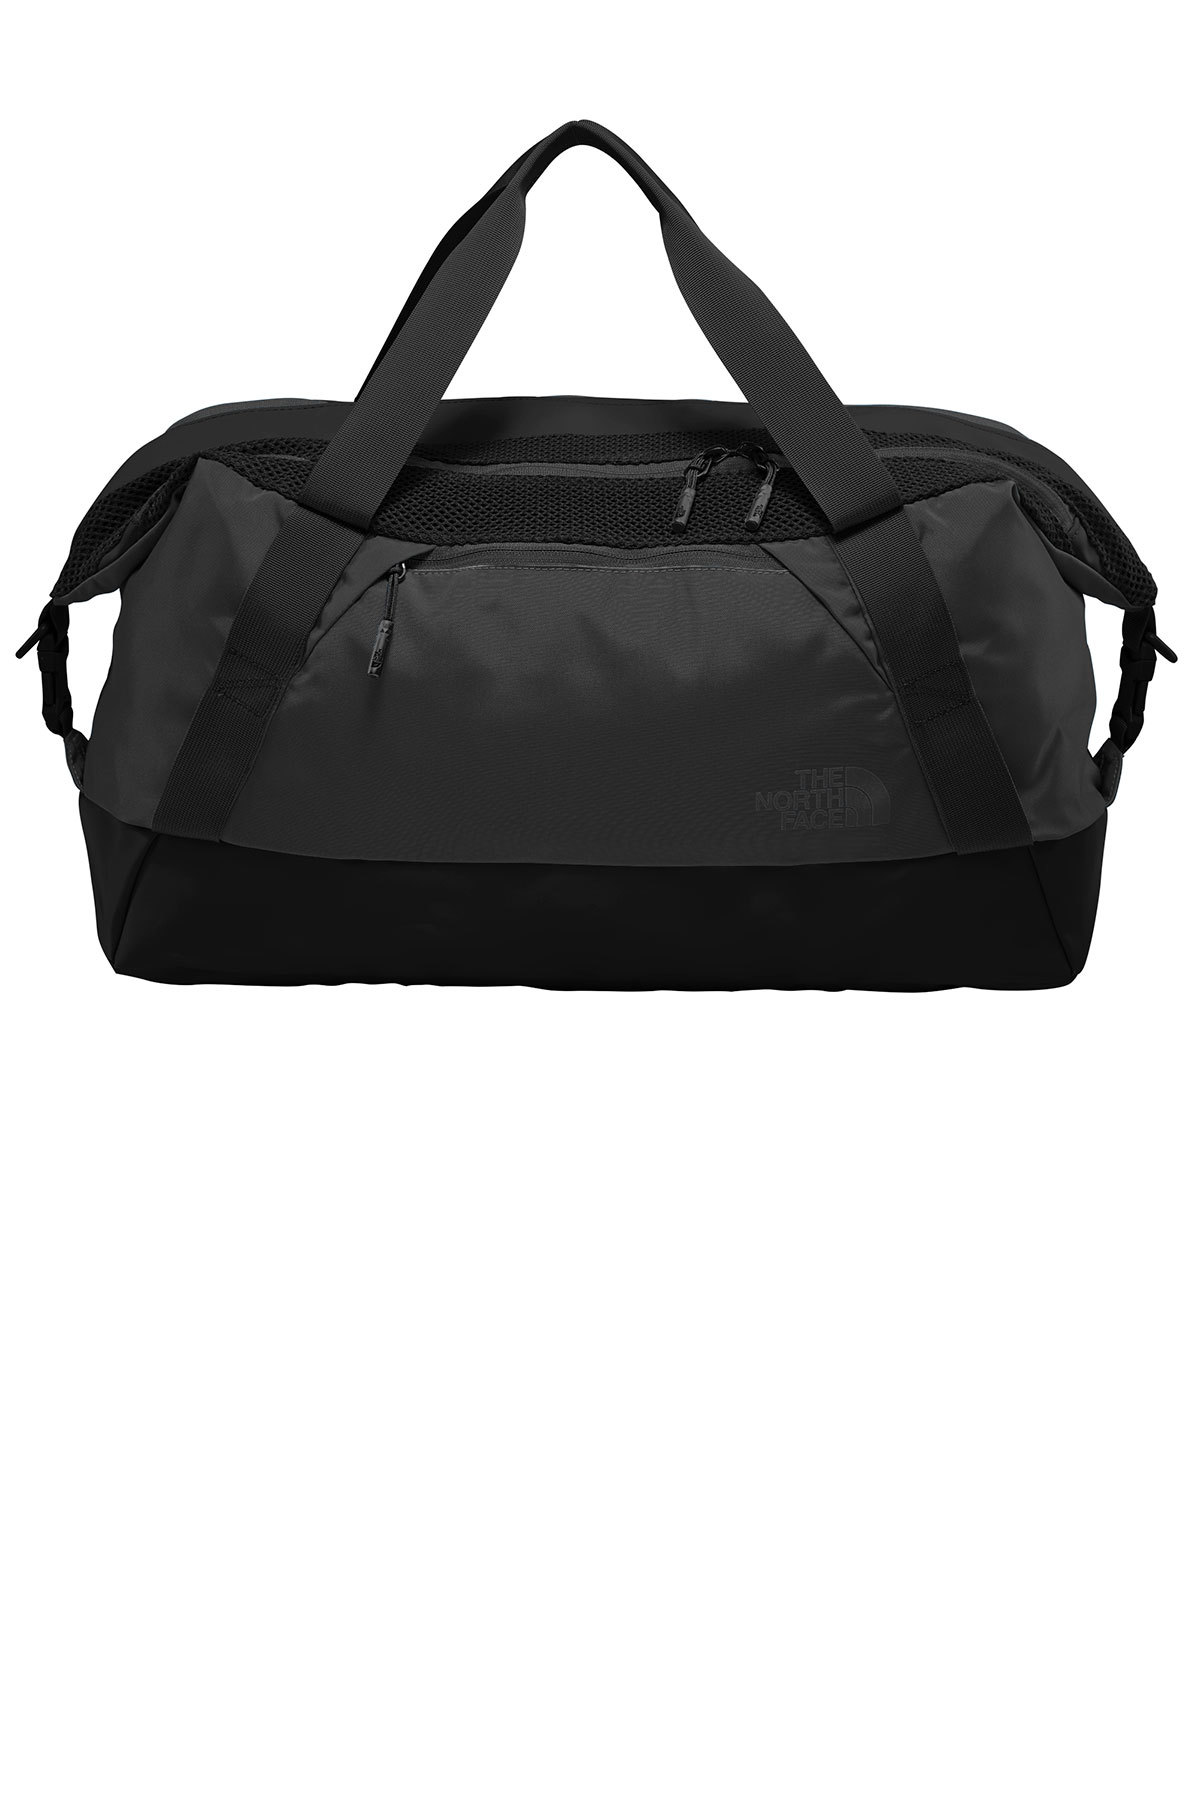 NF0A3KXX The North Face ® Apex Duffel